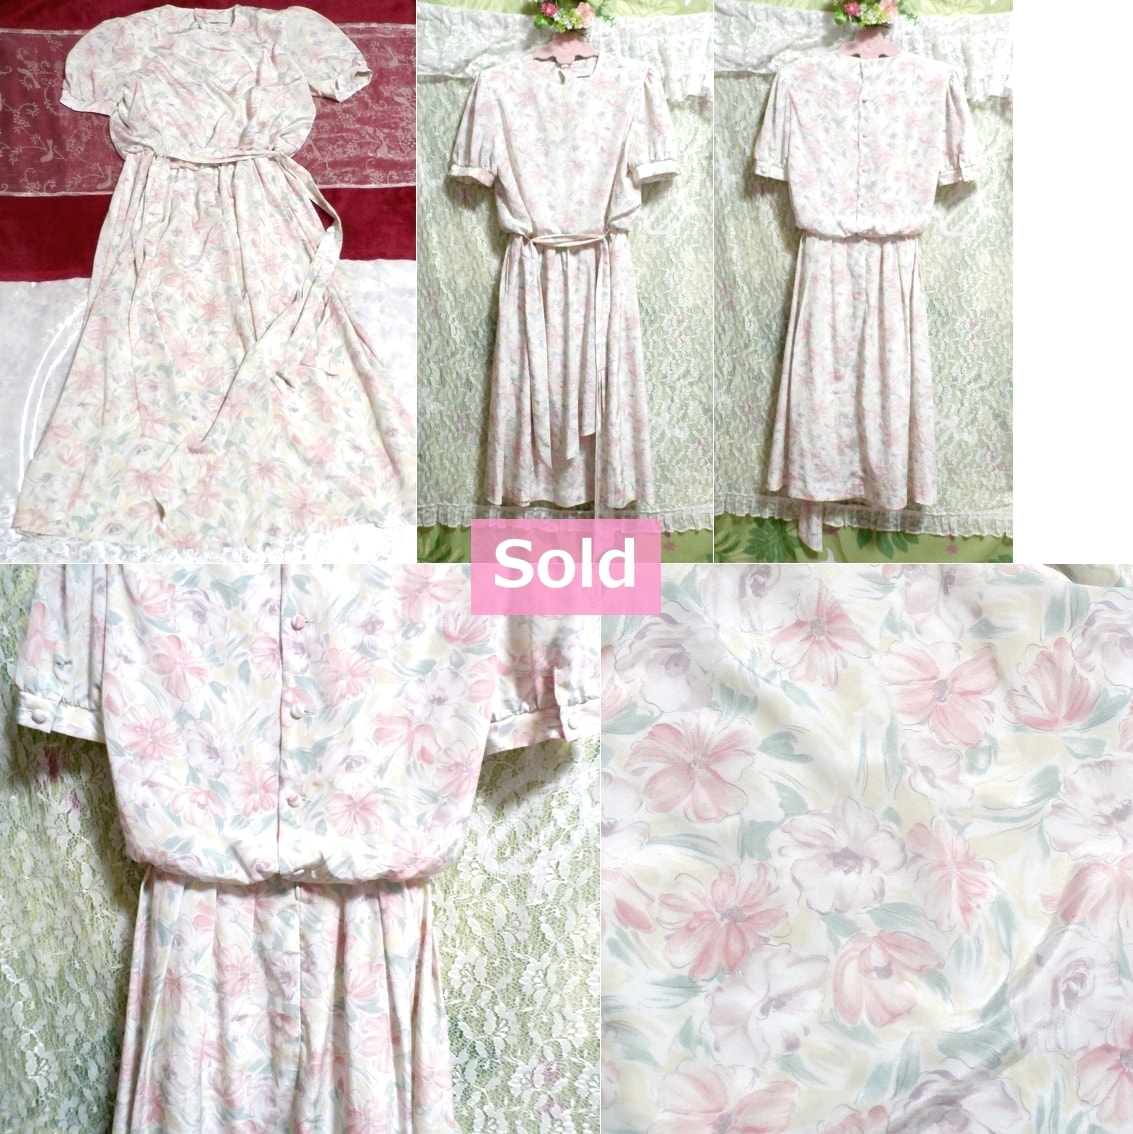 Short sleeve onepiece long skirt with light floral pattern